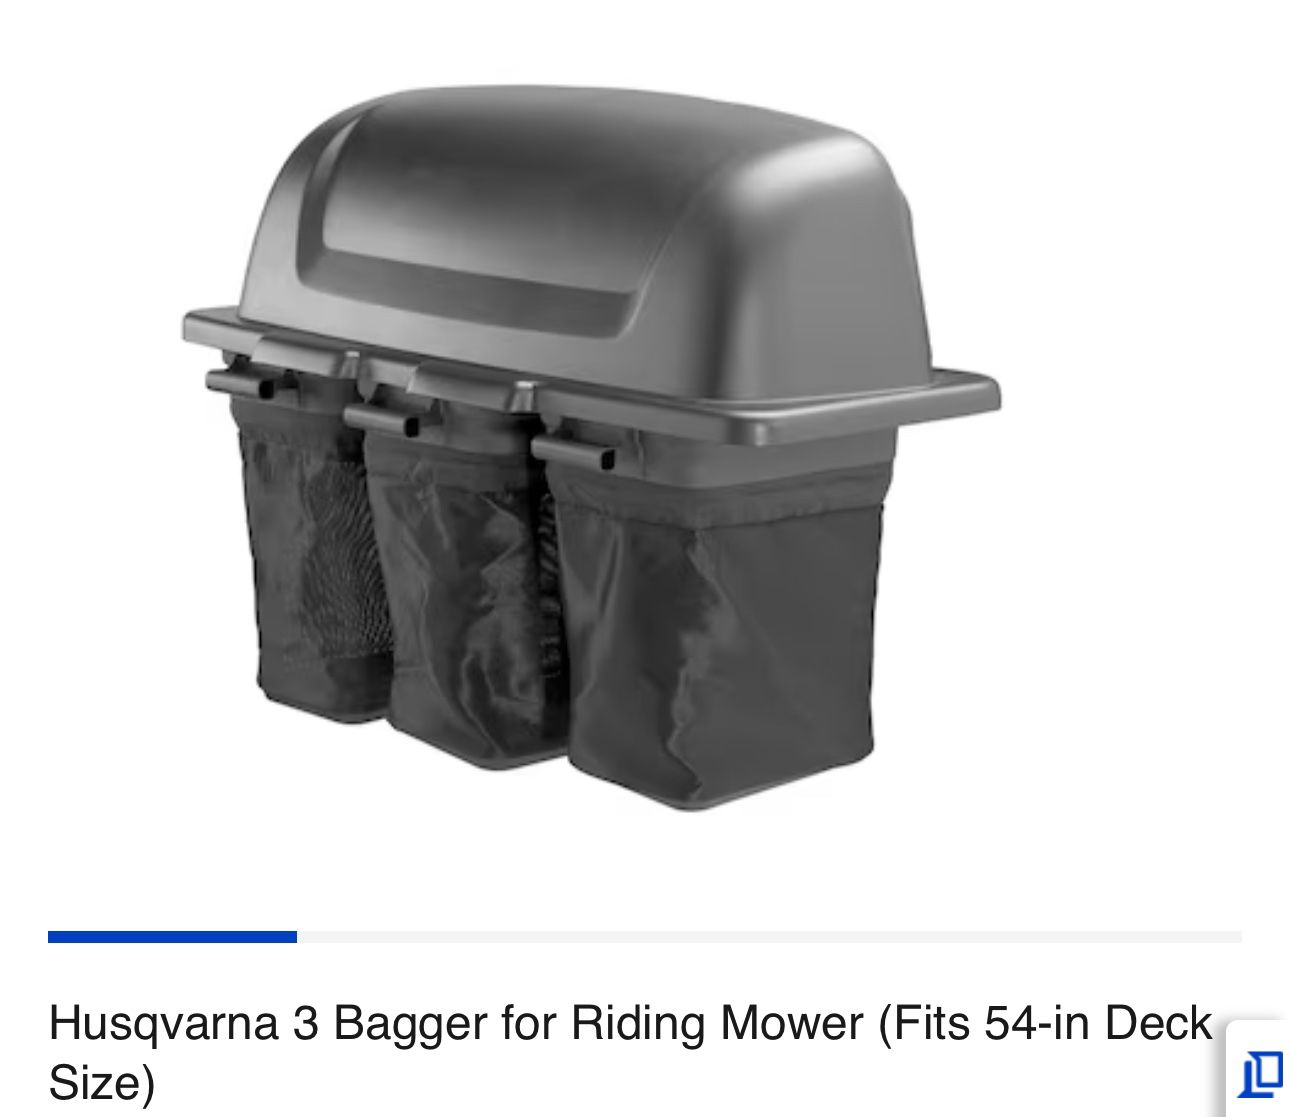 Husqvarna 3 Bagger for Riding Mower (Fits 54-in Deck Size)